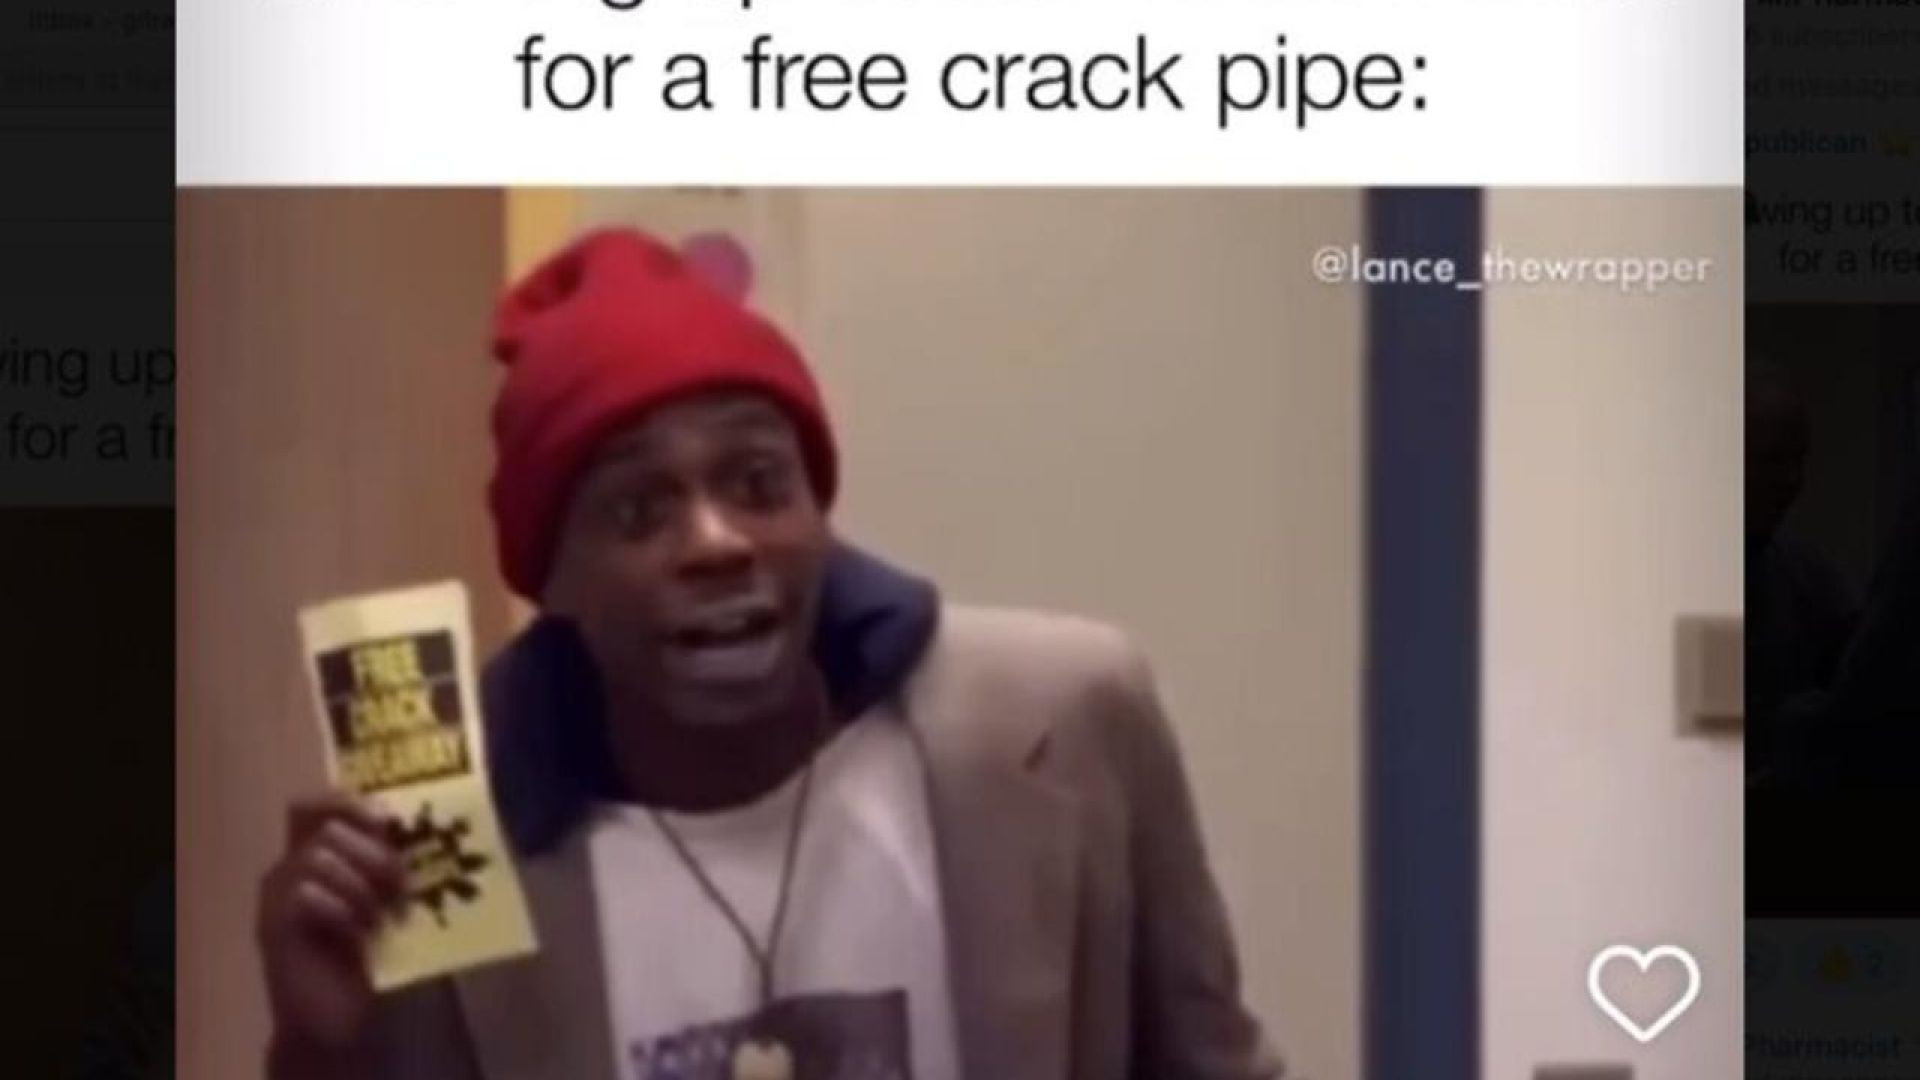 Free Crack Pipes at the White House